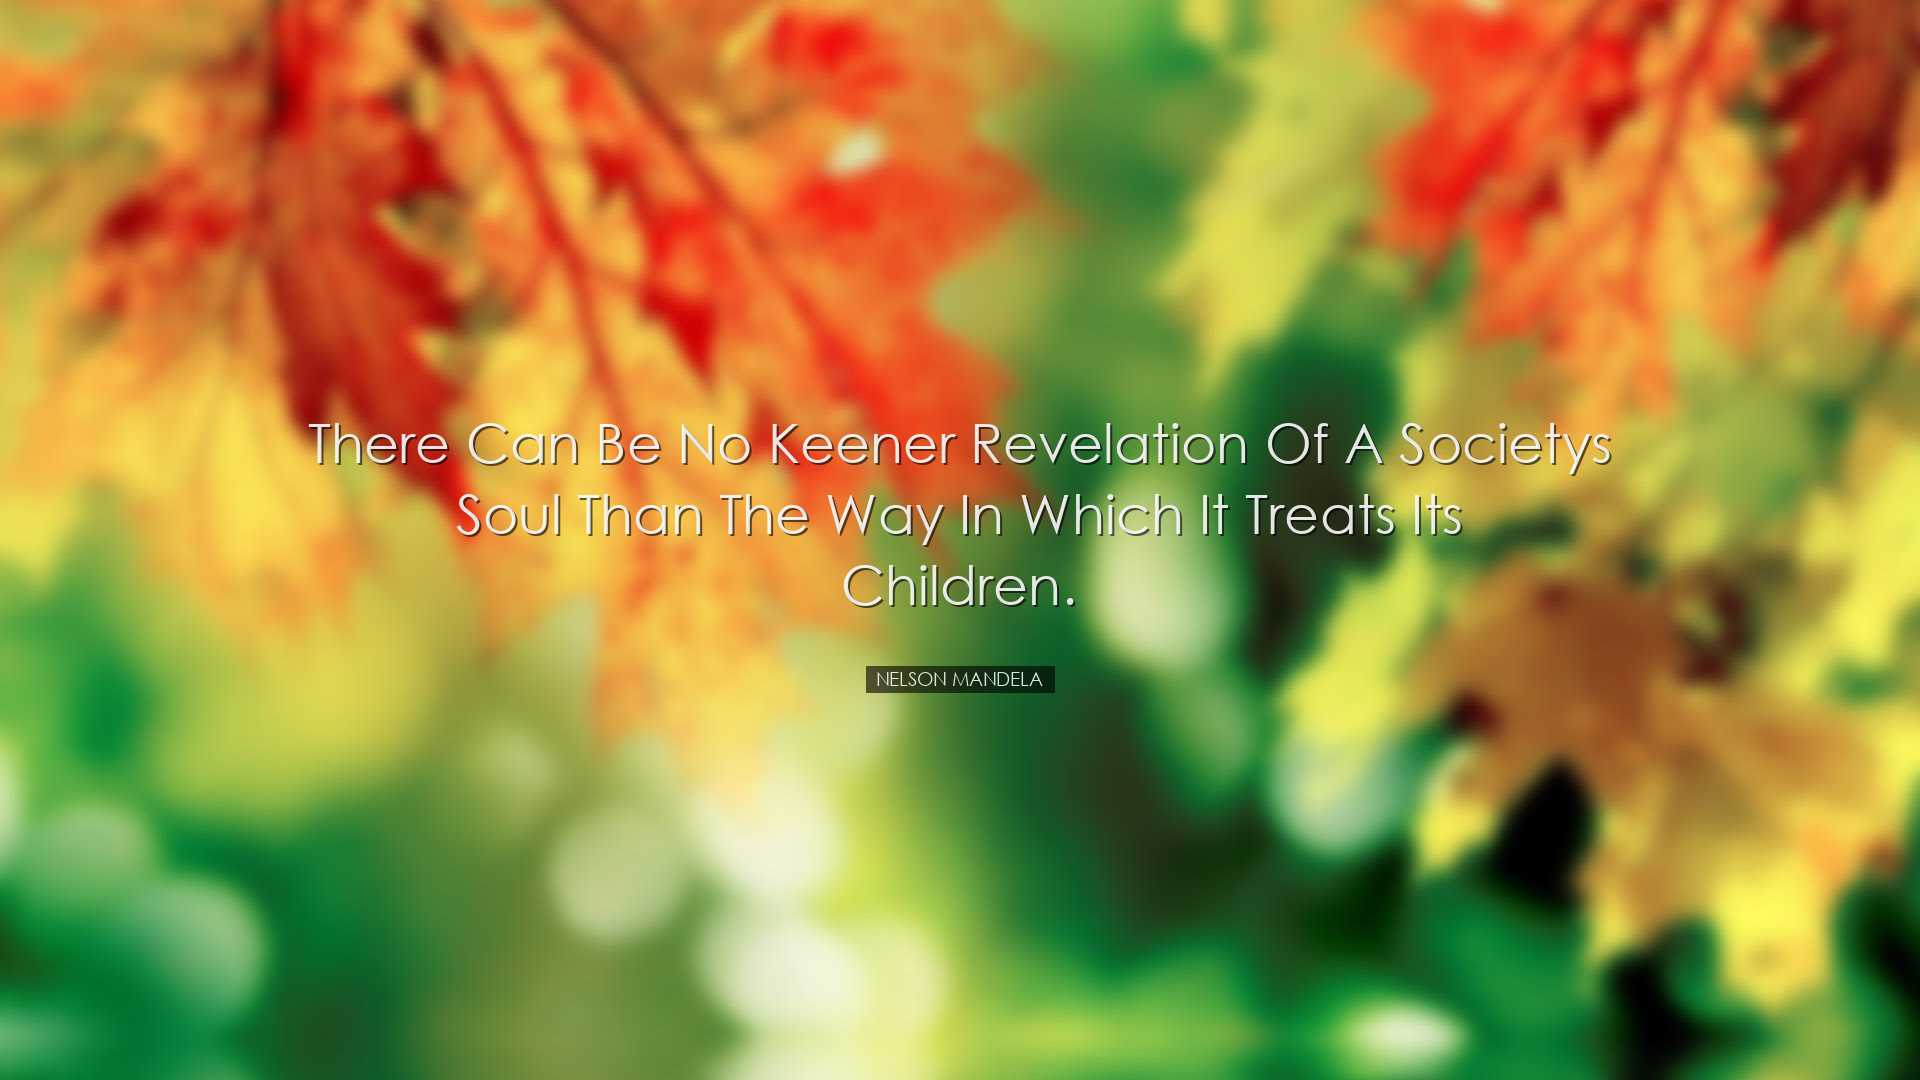 There can be no keener revelation of a societys soul than the way